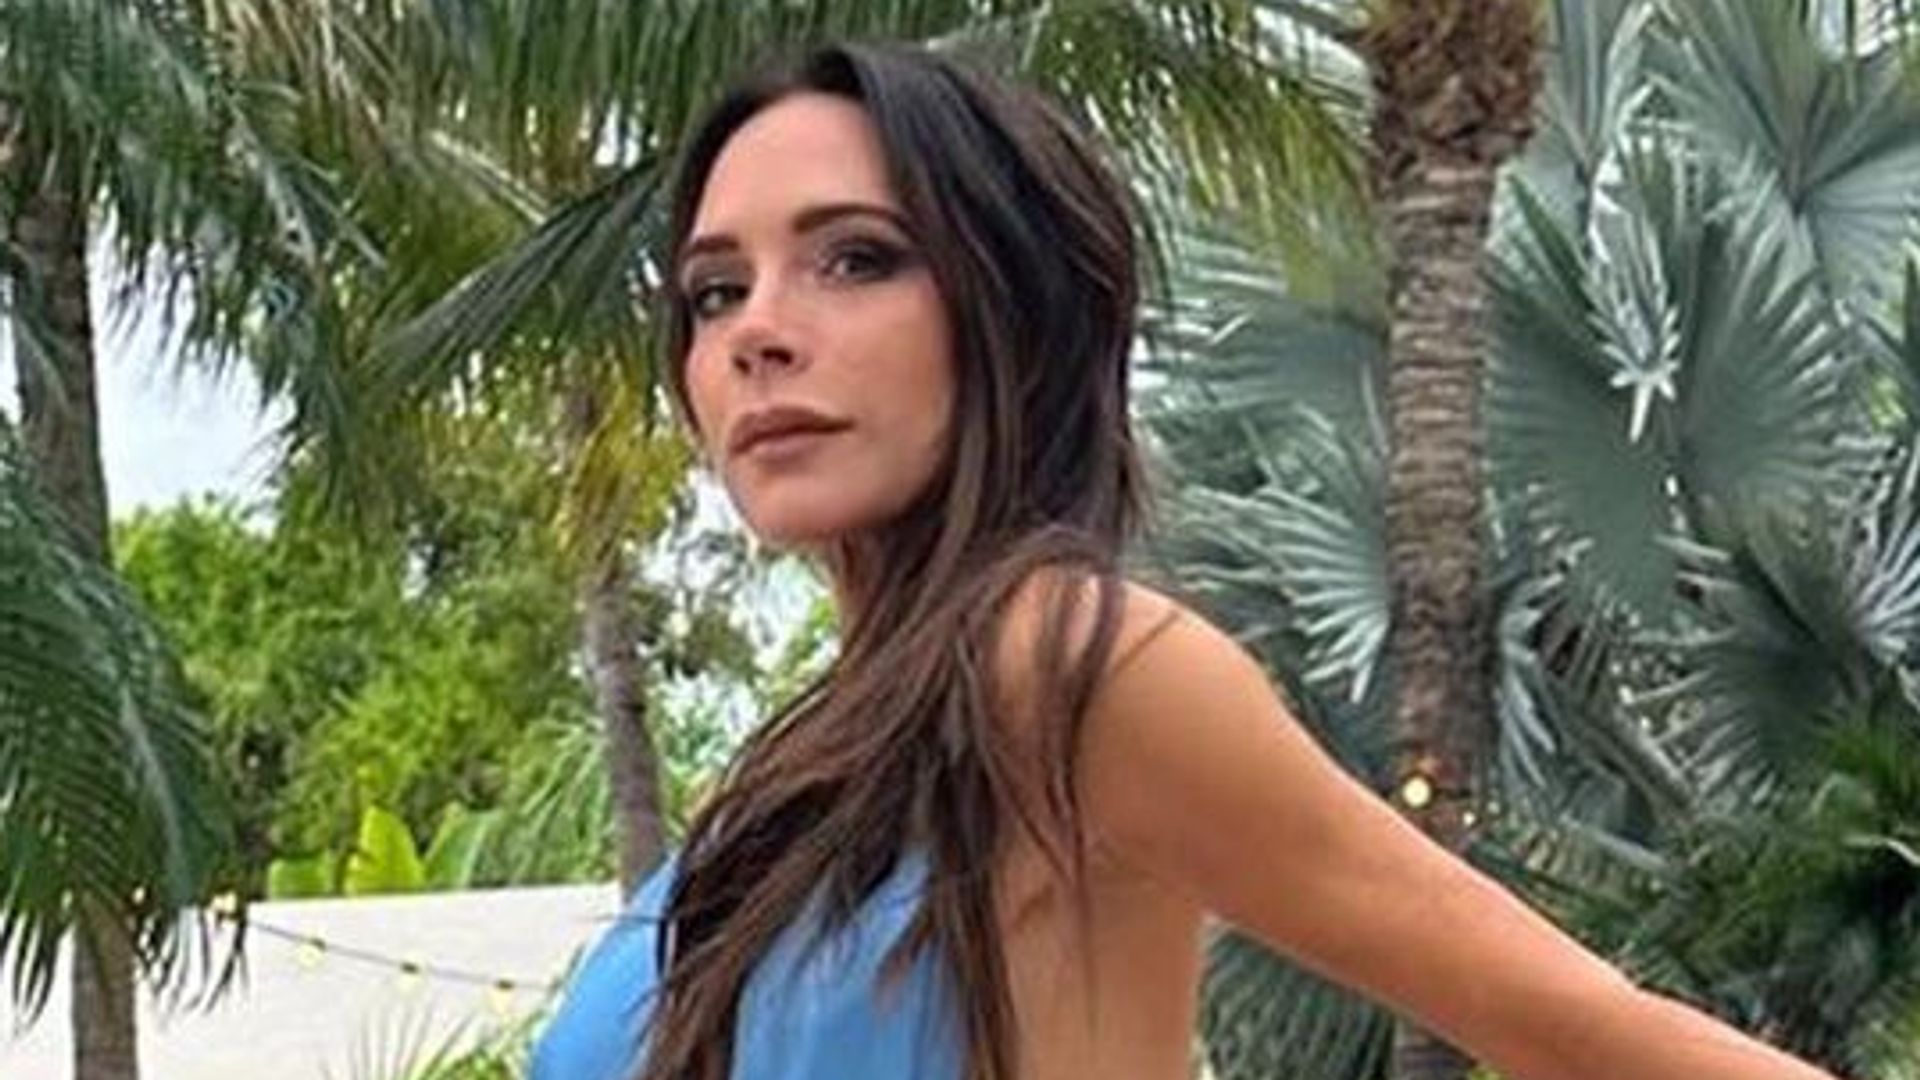 victoria beckham wearing blue dress with red train by swimming pool